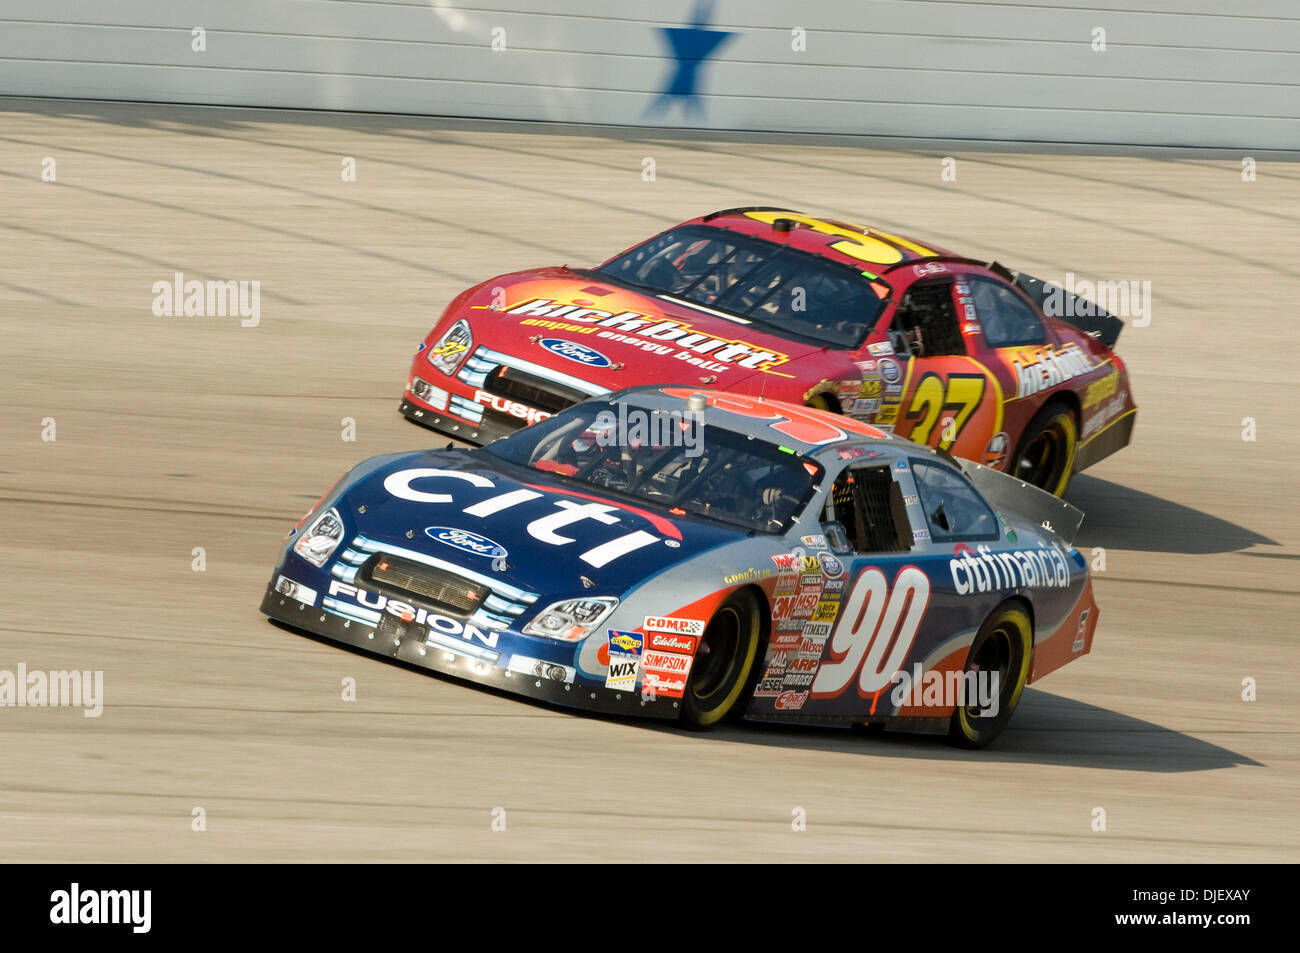 Nov 03, 2007 - Fort Worth, Texas, USA - #37 CASEY ATWOOD battles for position with #90 Stephen Leicht. during the NASCAR Busch Series race at the Texas Motor Speedway. (Credit Image: © David Bailey/ZUMA Press) Stock Photo